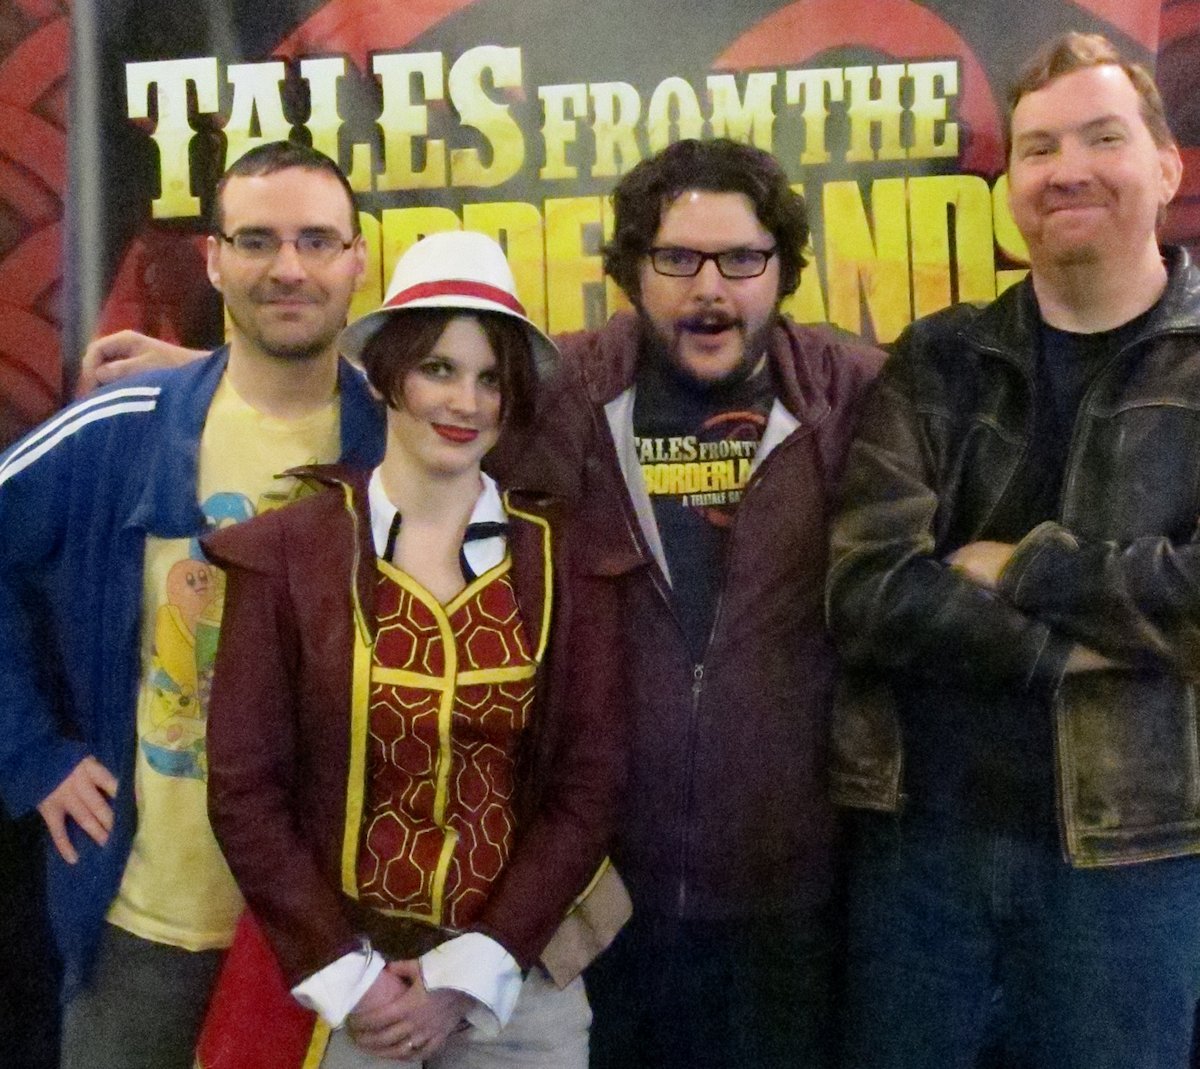 Tales from the Borderlands premiere Paul Acevedo, Fiona, Job Stauffer, and Matthew Armstrong